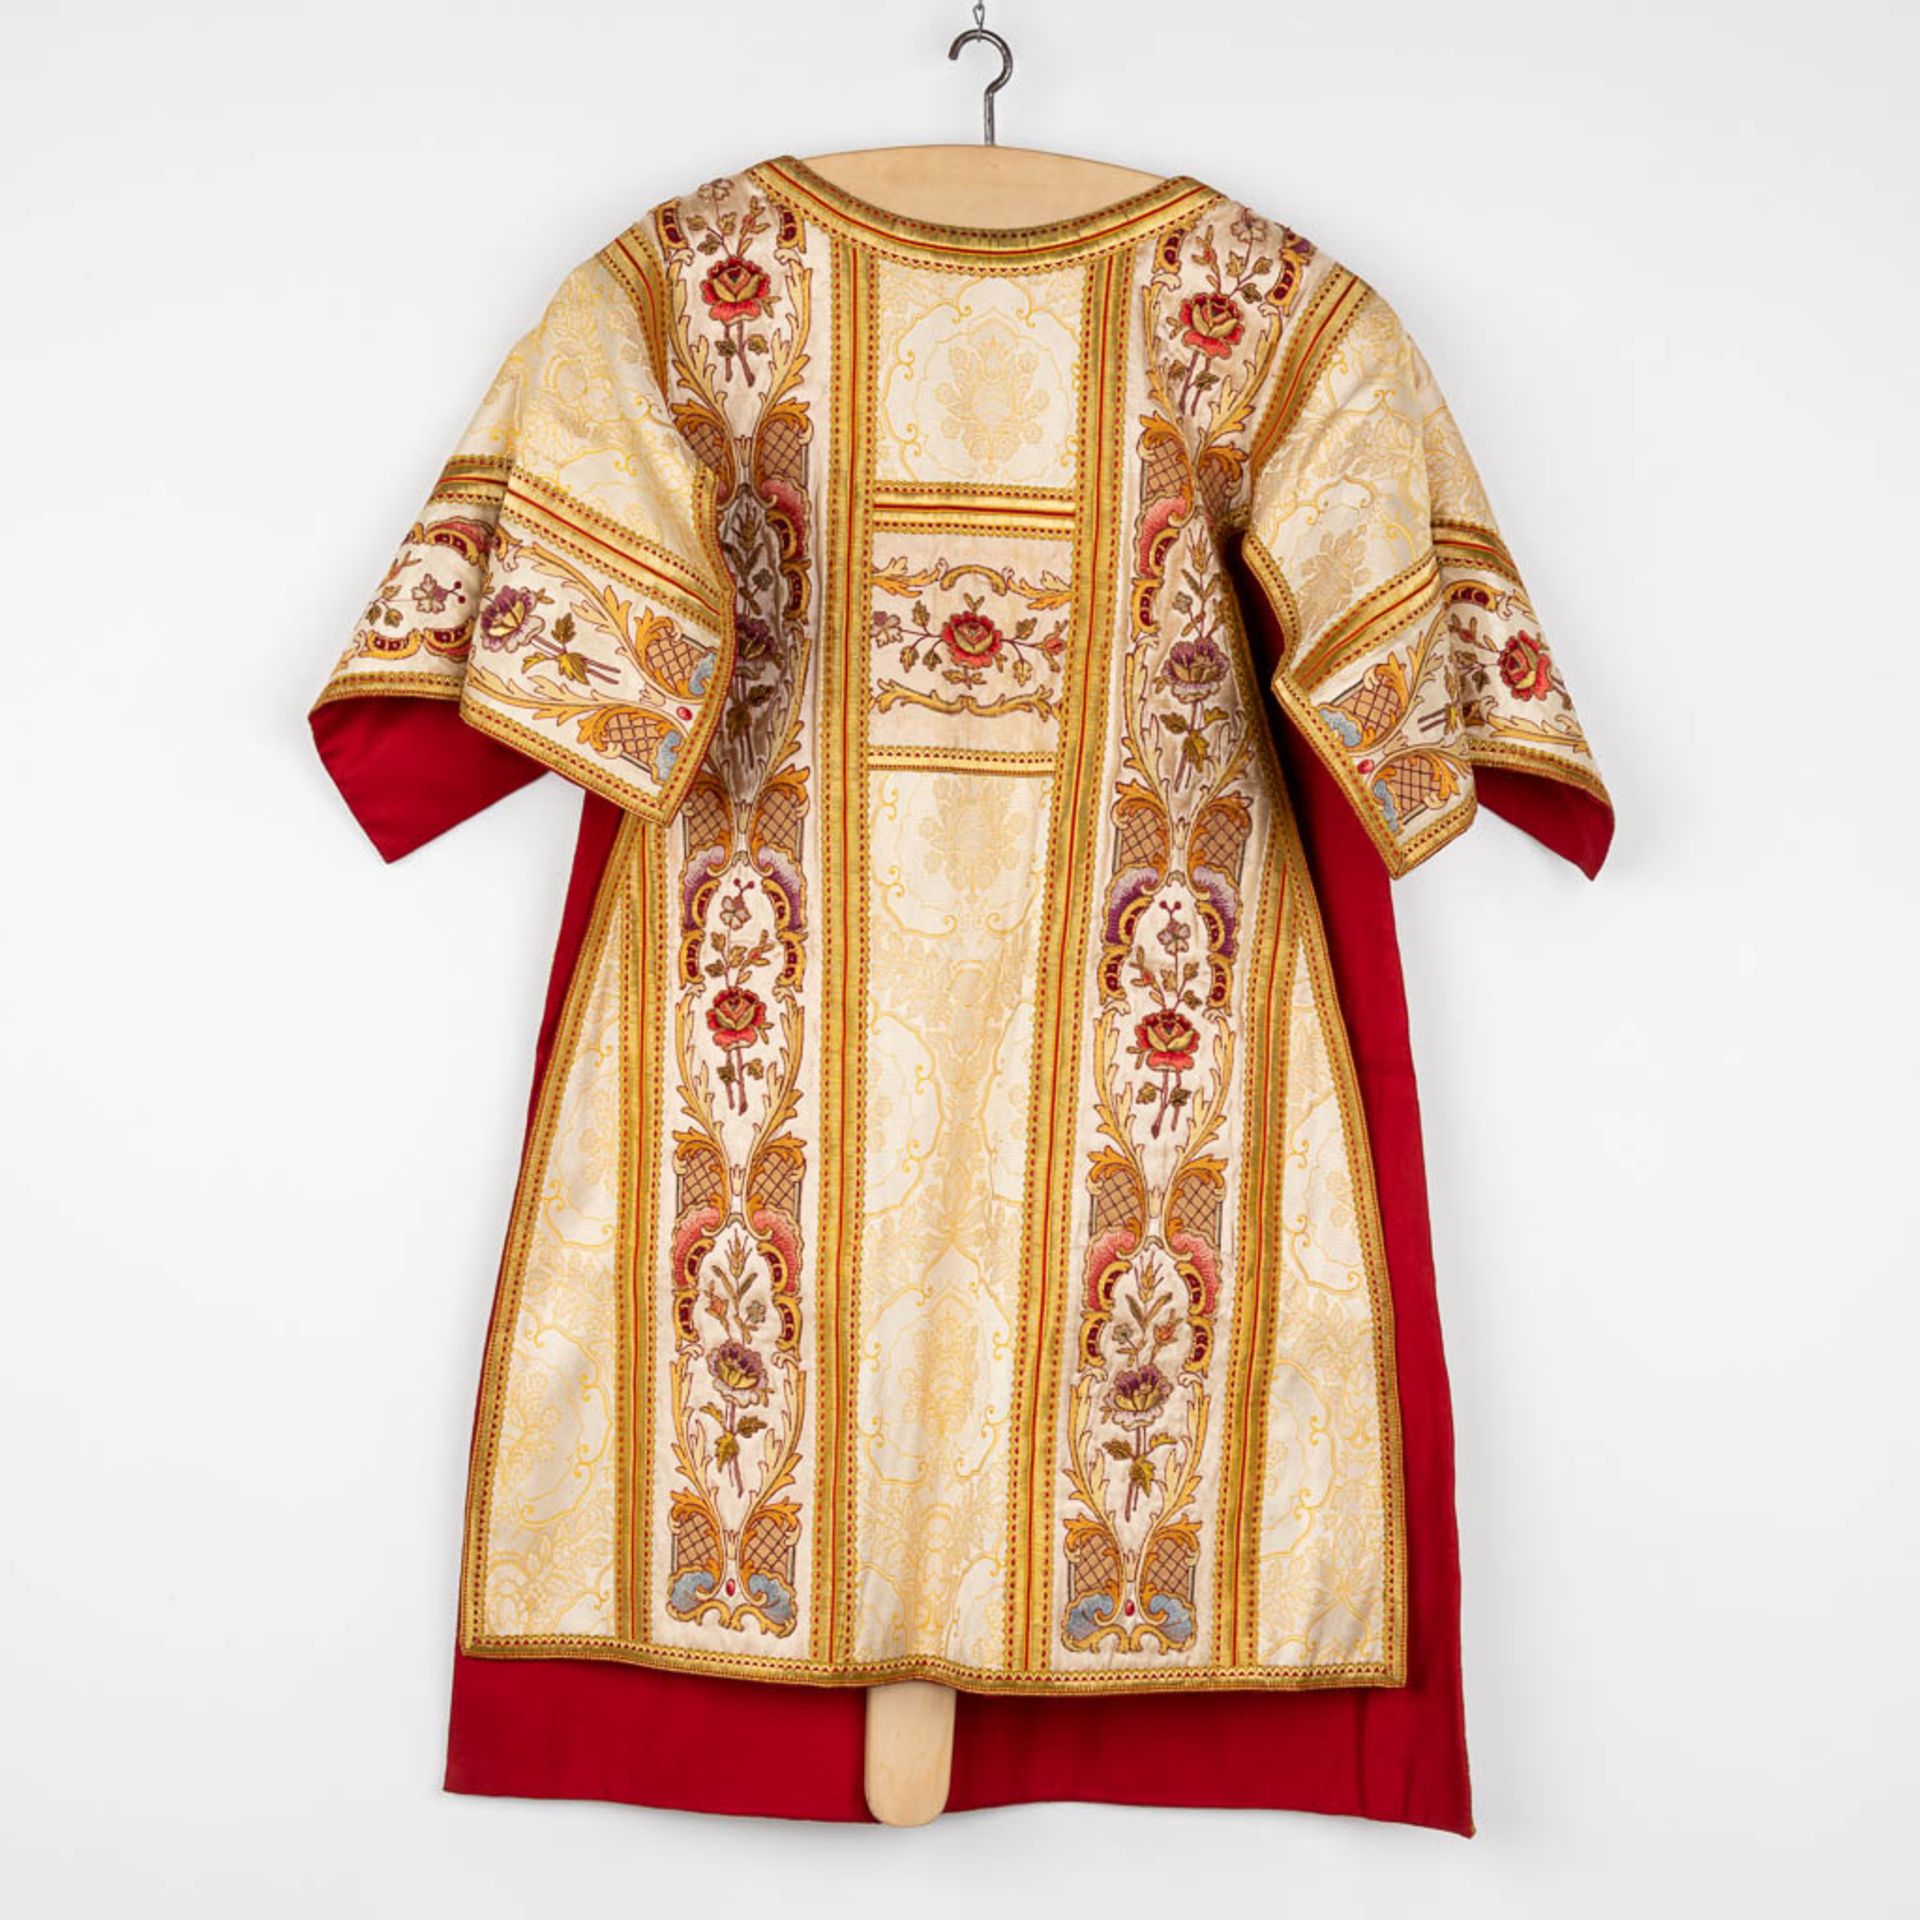 A Roman Chasuble and two Dalmatics, decorated with thick gold thread and embroidery in floral motive - Image 10 of 23